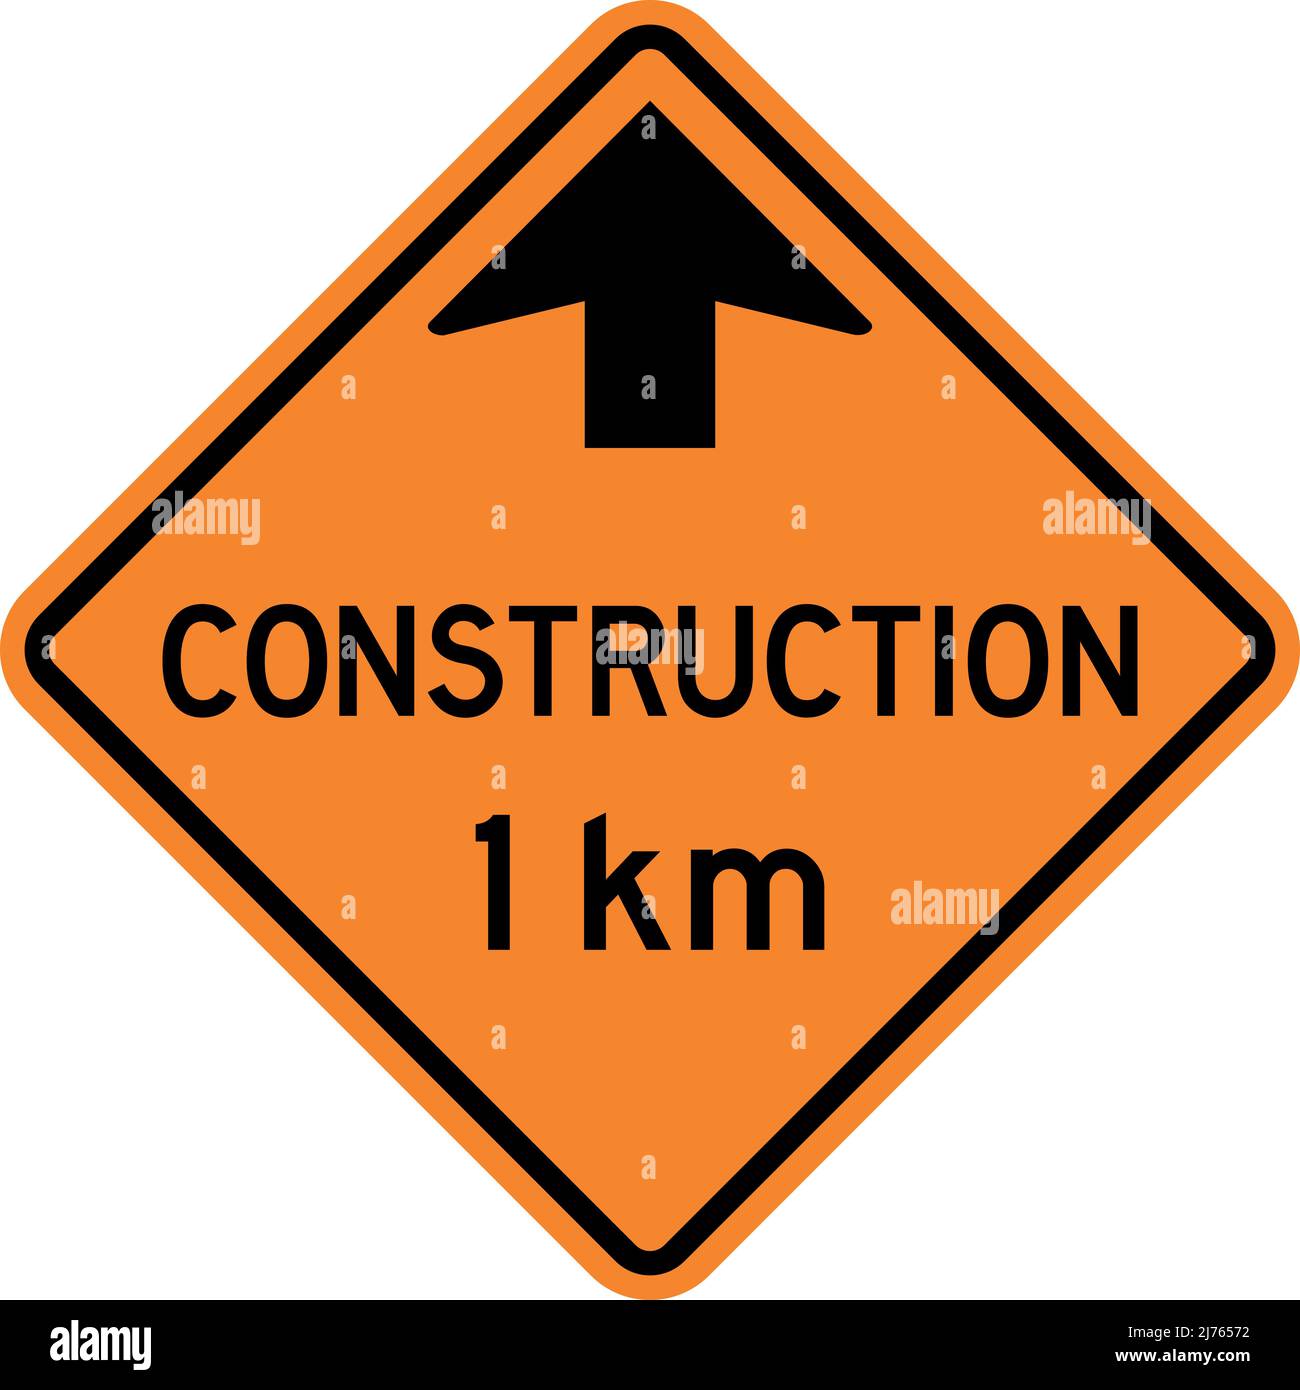 Construction 1 km ahead sign. Orange diamond background. Road works signs and symbols. Stock Vector